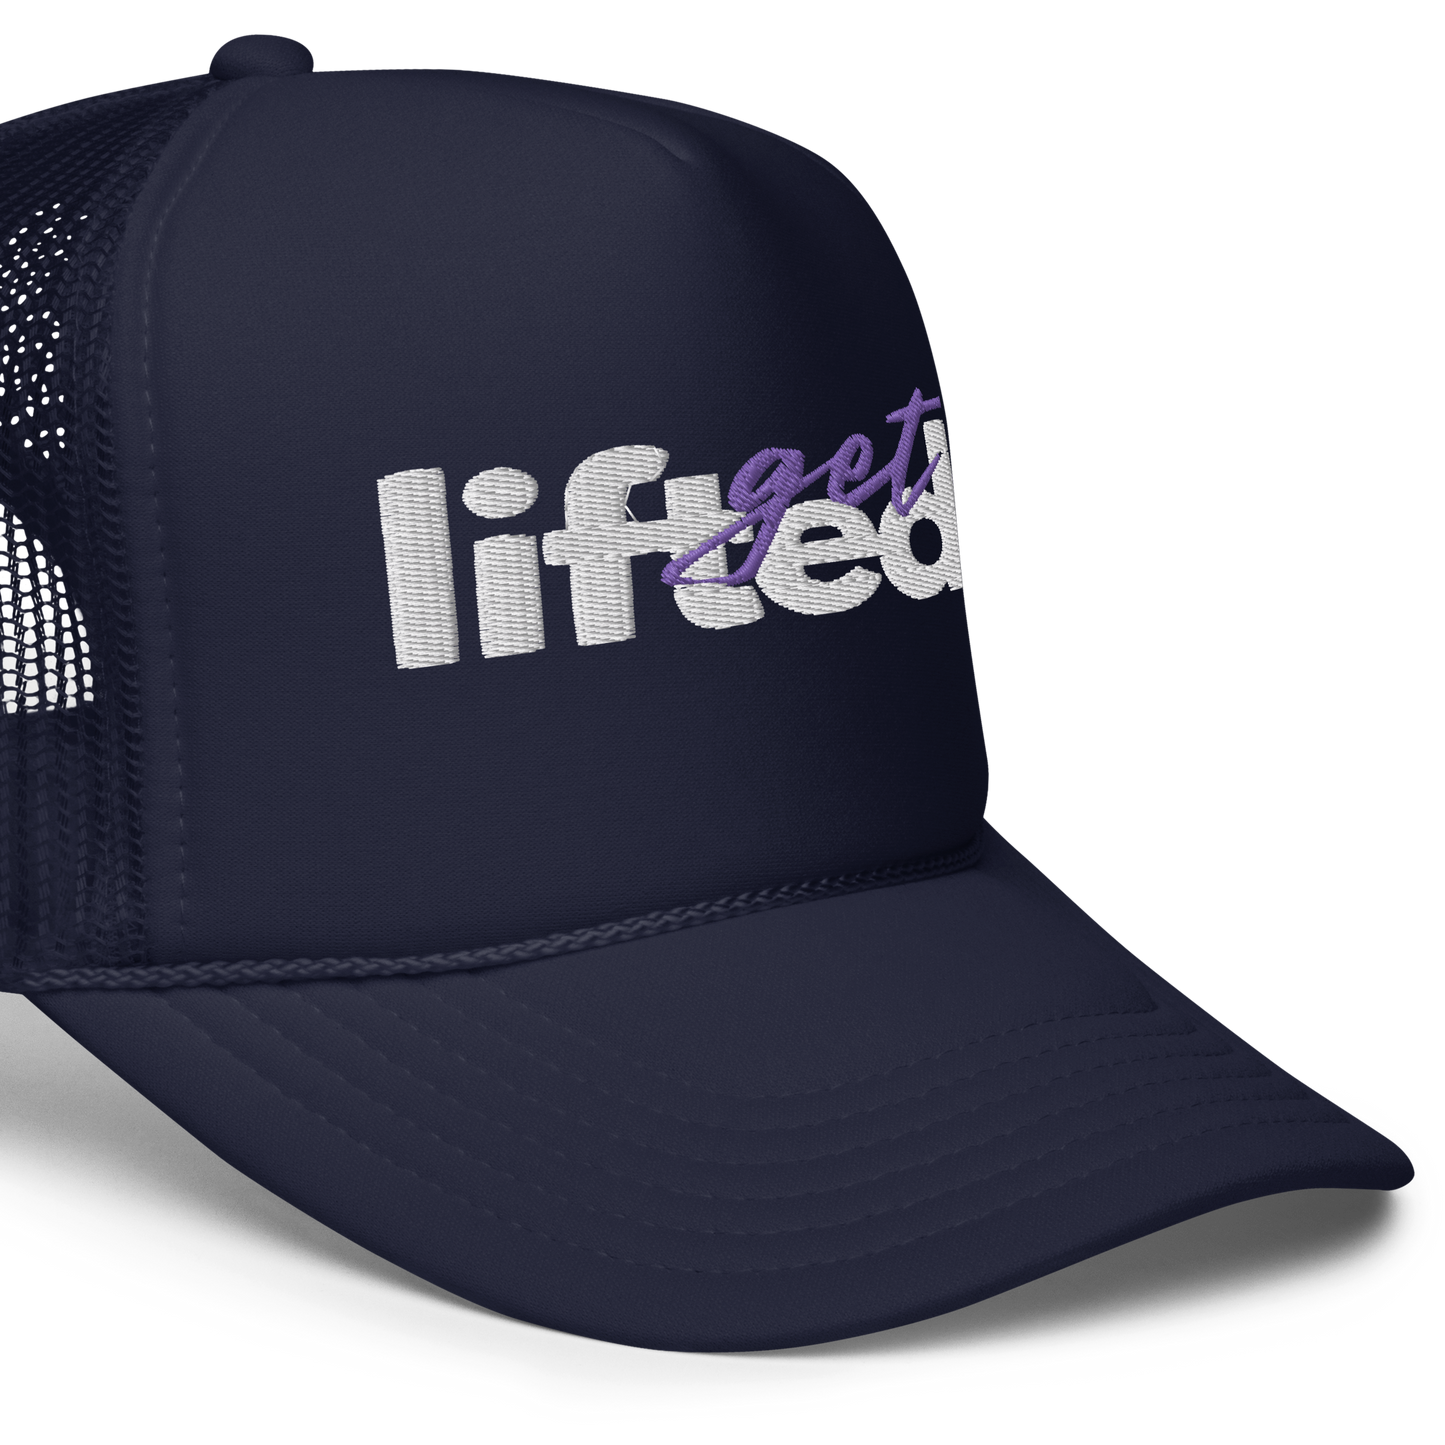 Embroidery Get Lifted Trucker Hat